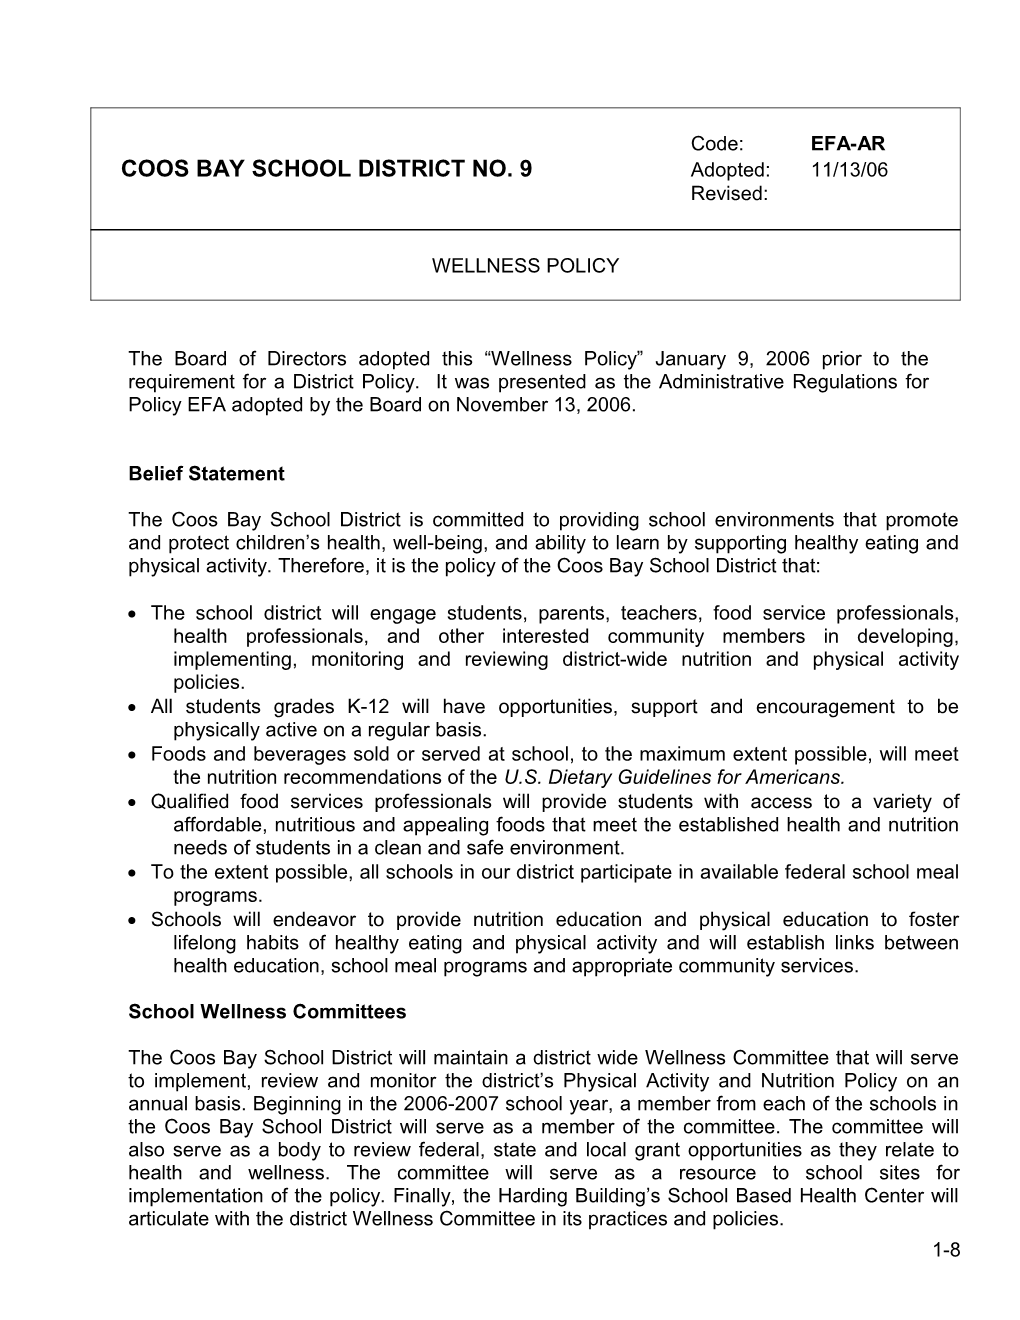 COOS BAY SCHOOL DISTRICT NO. 9 Adopted: 11/13/06